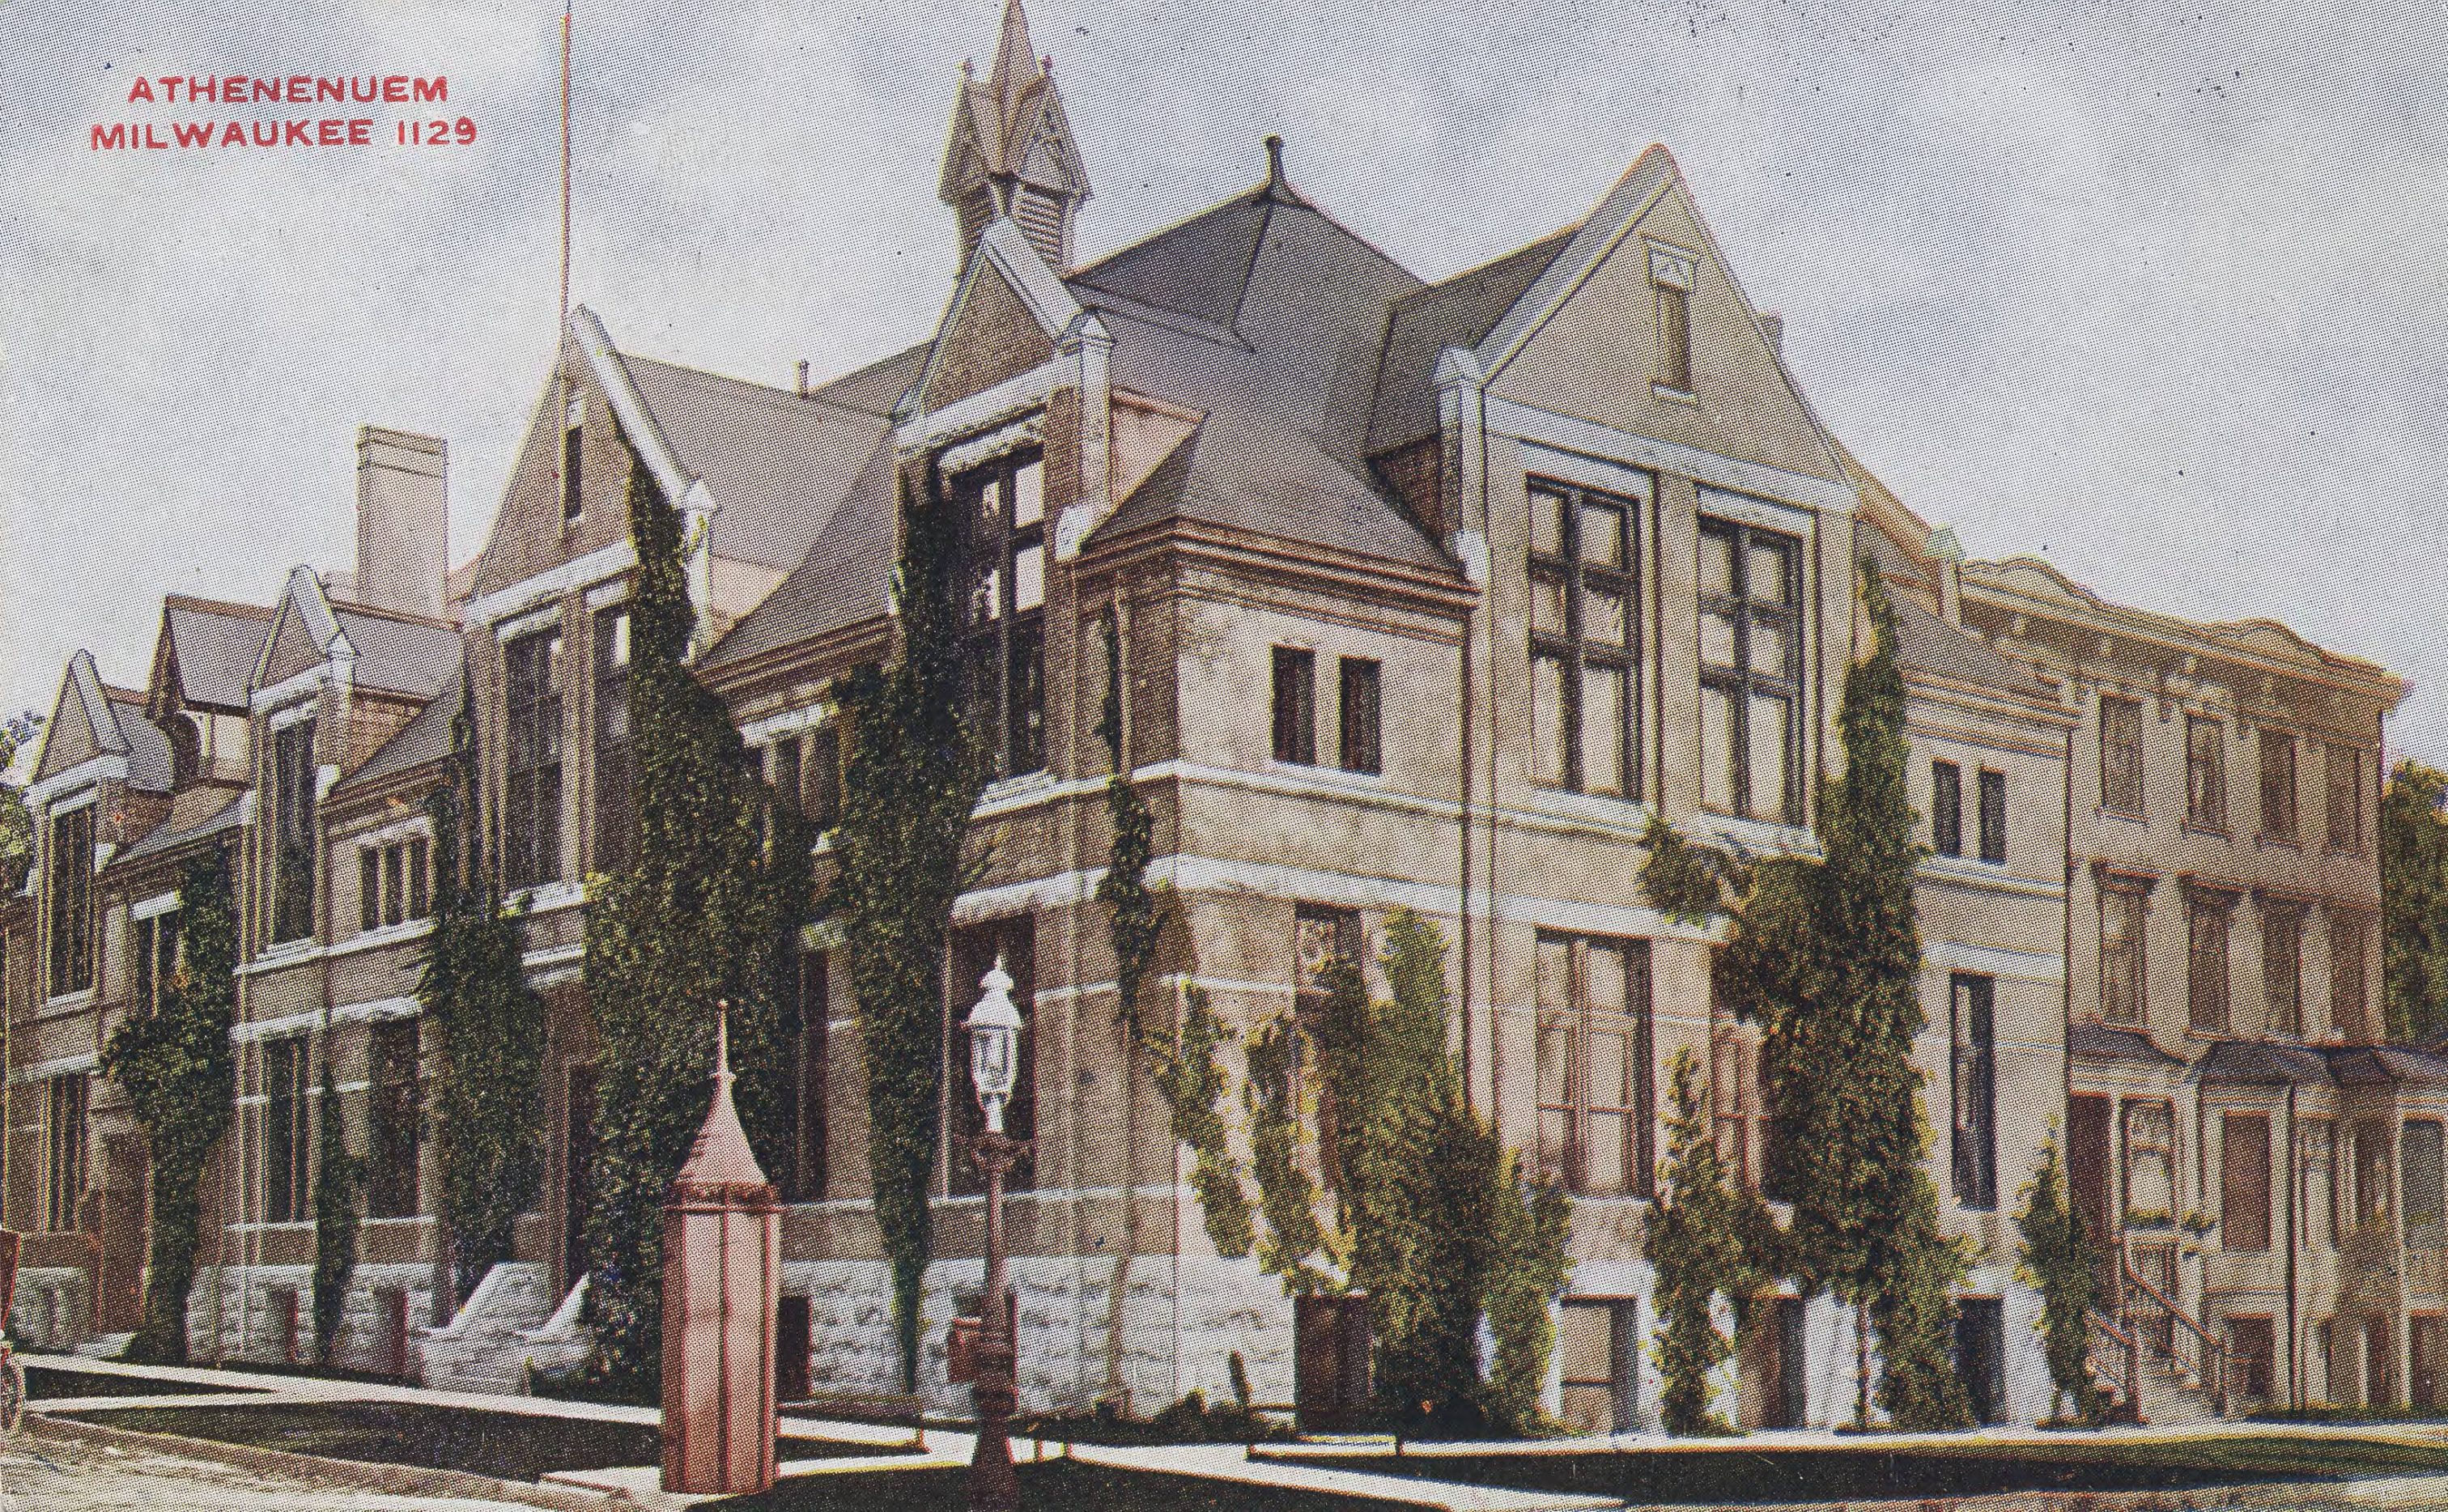 This postcard illustrates the Athenaeum Building, located at 813 E. Kilbourn Avenue. It was built in 1887 and paid for by the Woman's Club of Wisconsin, which still has its headquarters in the building today. 